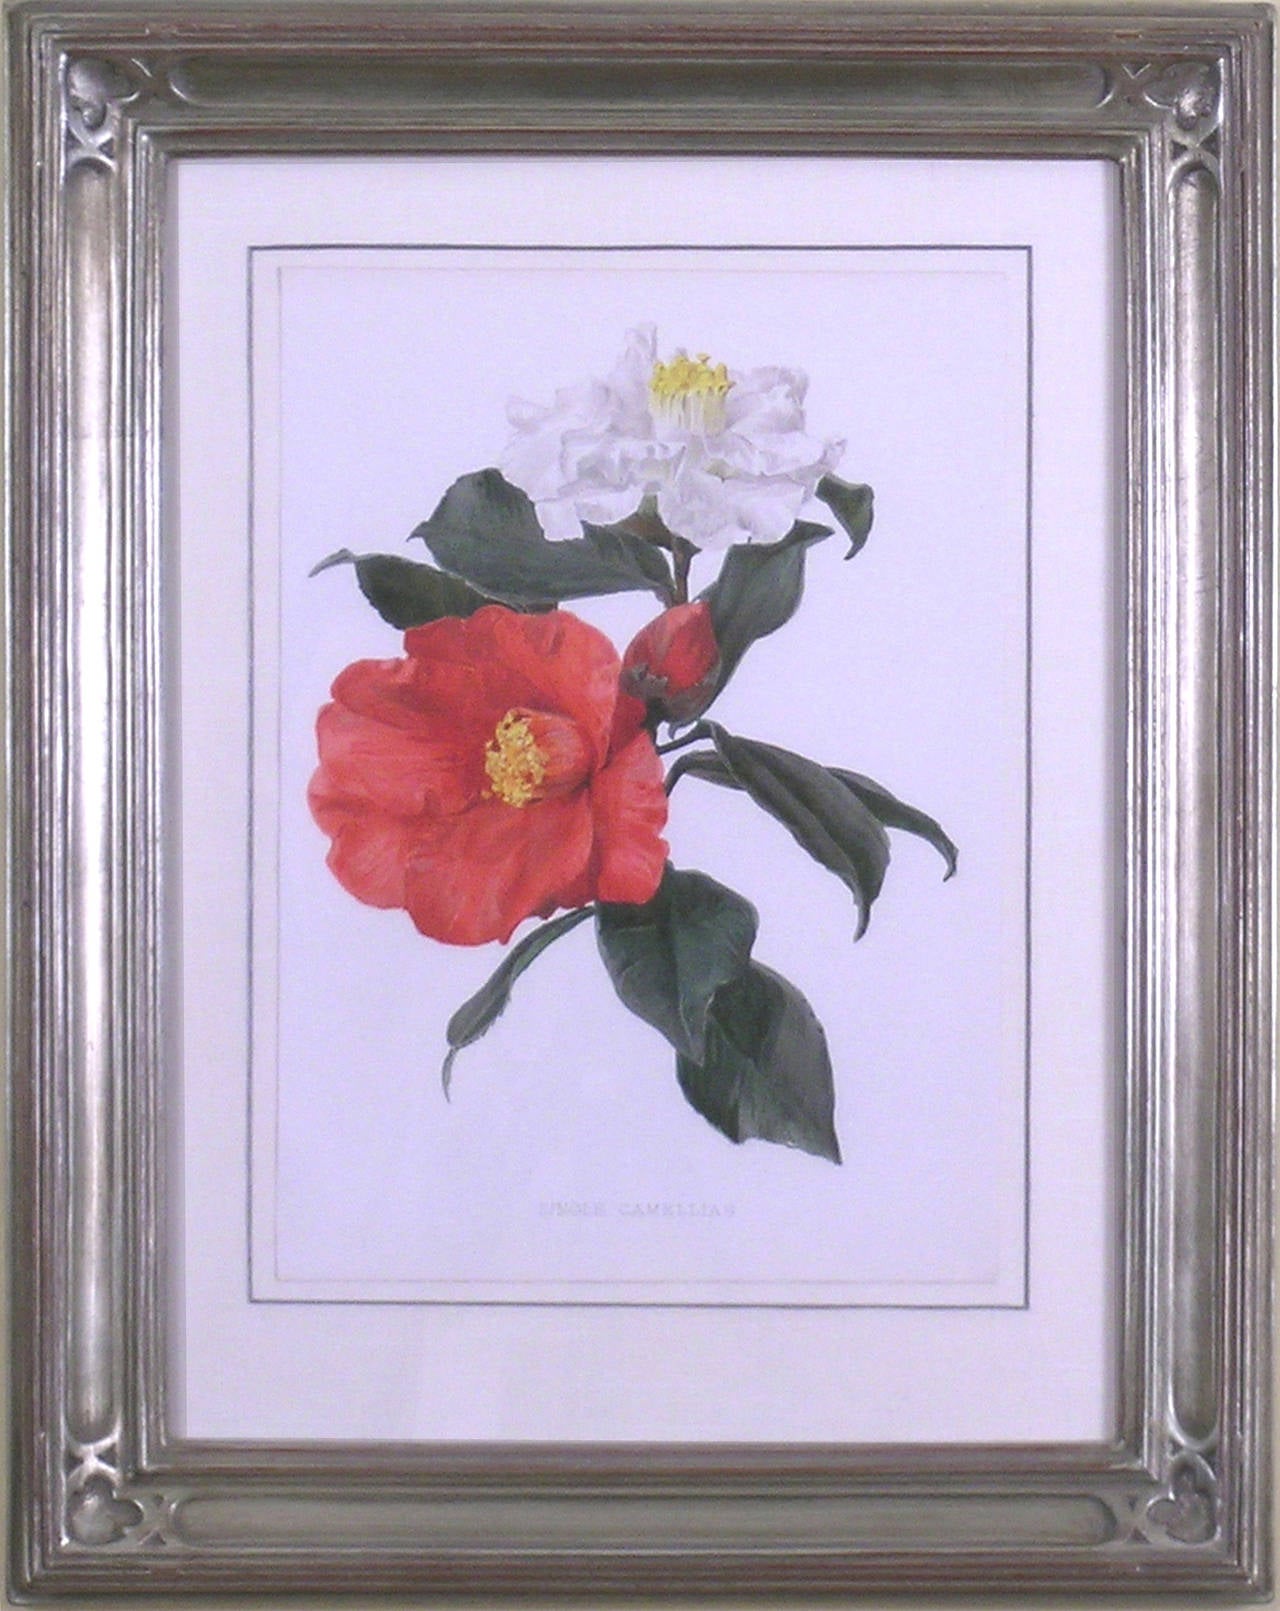 Single Camellias - Print by Henry George Moon